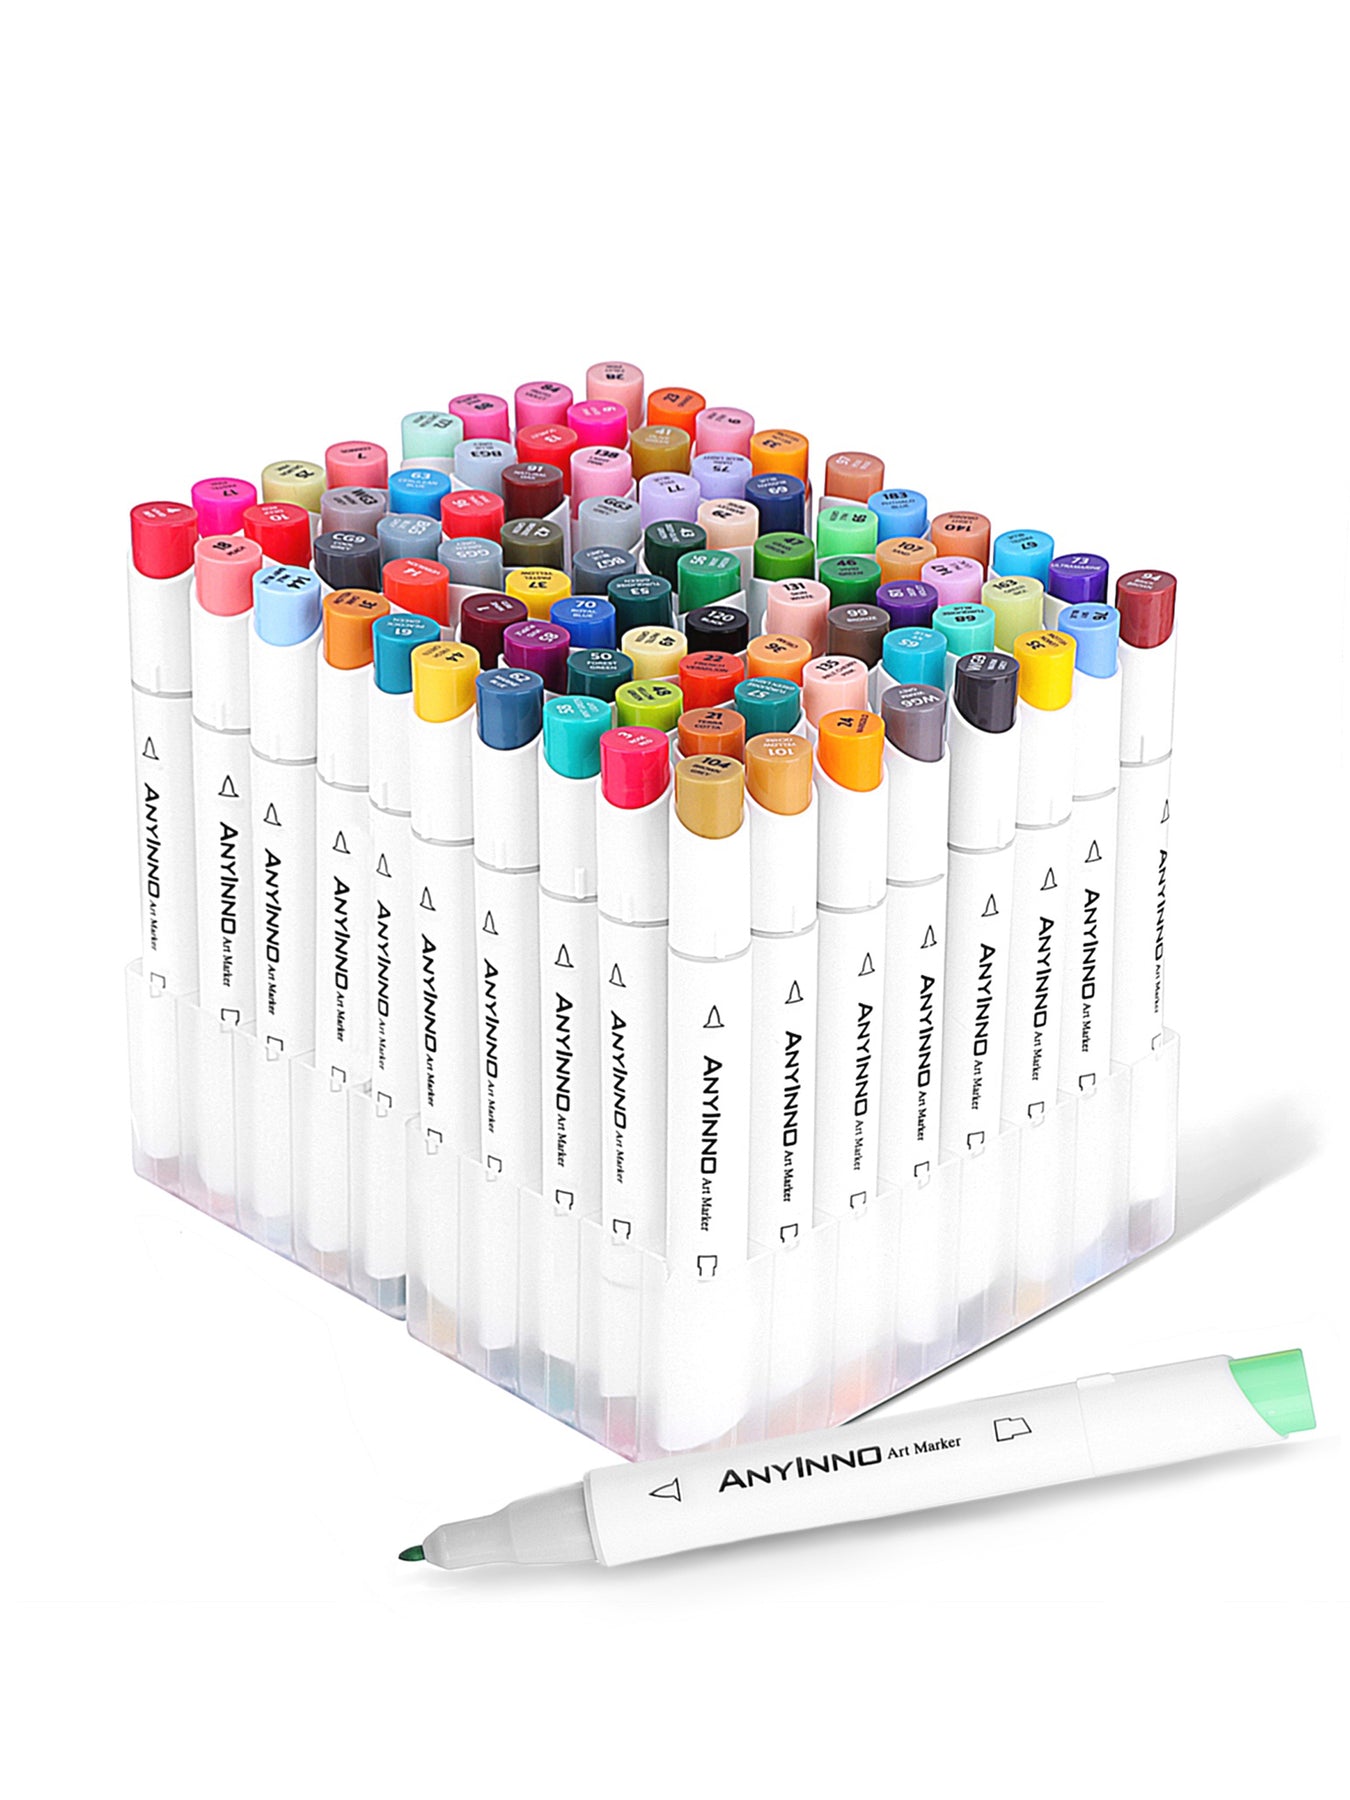 Artify Markers 40 Colors Set - Artist Alcohol Art Dual Tip Markers